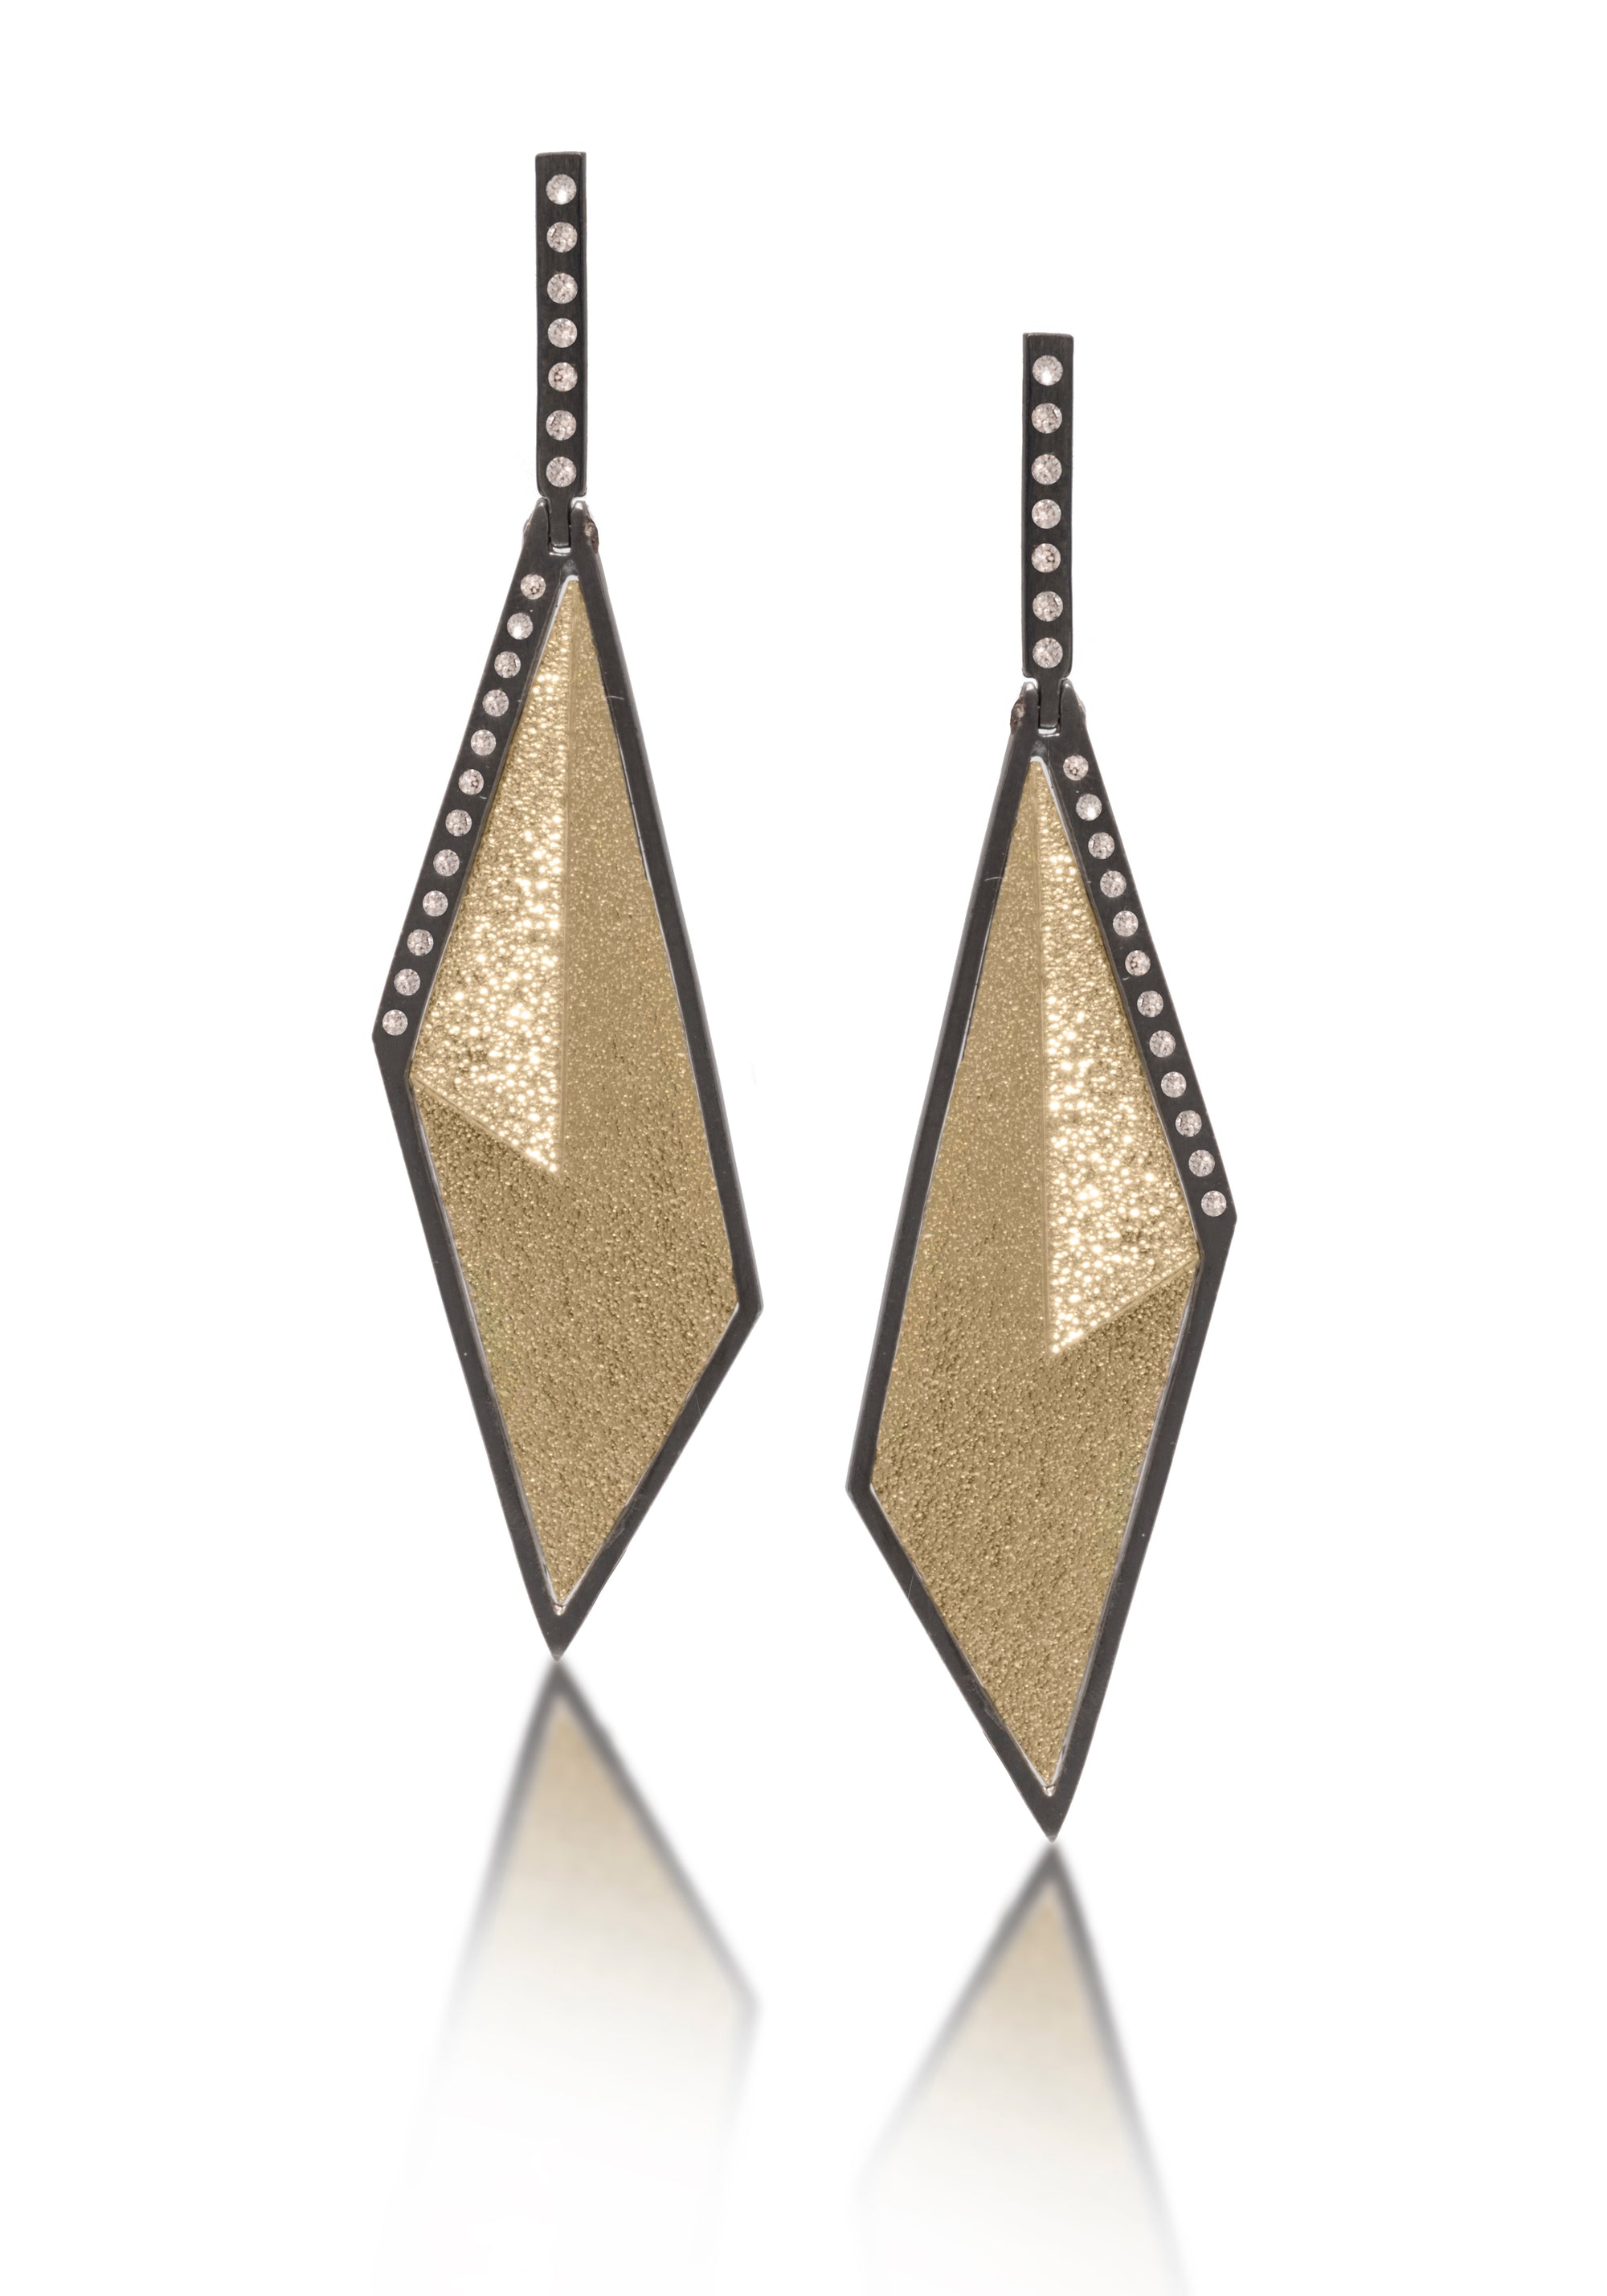 Gem Link Earring #15 in oxidized sterling silver and richly textured 18k bimetal, flush set with ideal cut white diamonds. Hinged, kite shaped or bar style top with 14k gold posts. Accent facet glitters with the texture of diamond facets, individually scored and textured.  0.2622 tcw